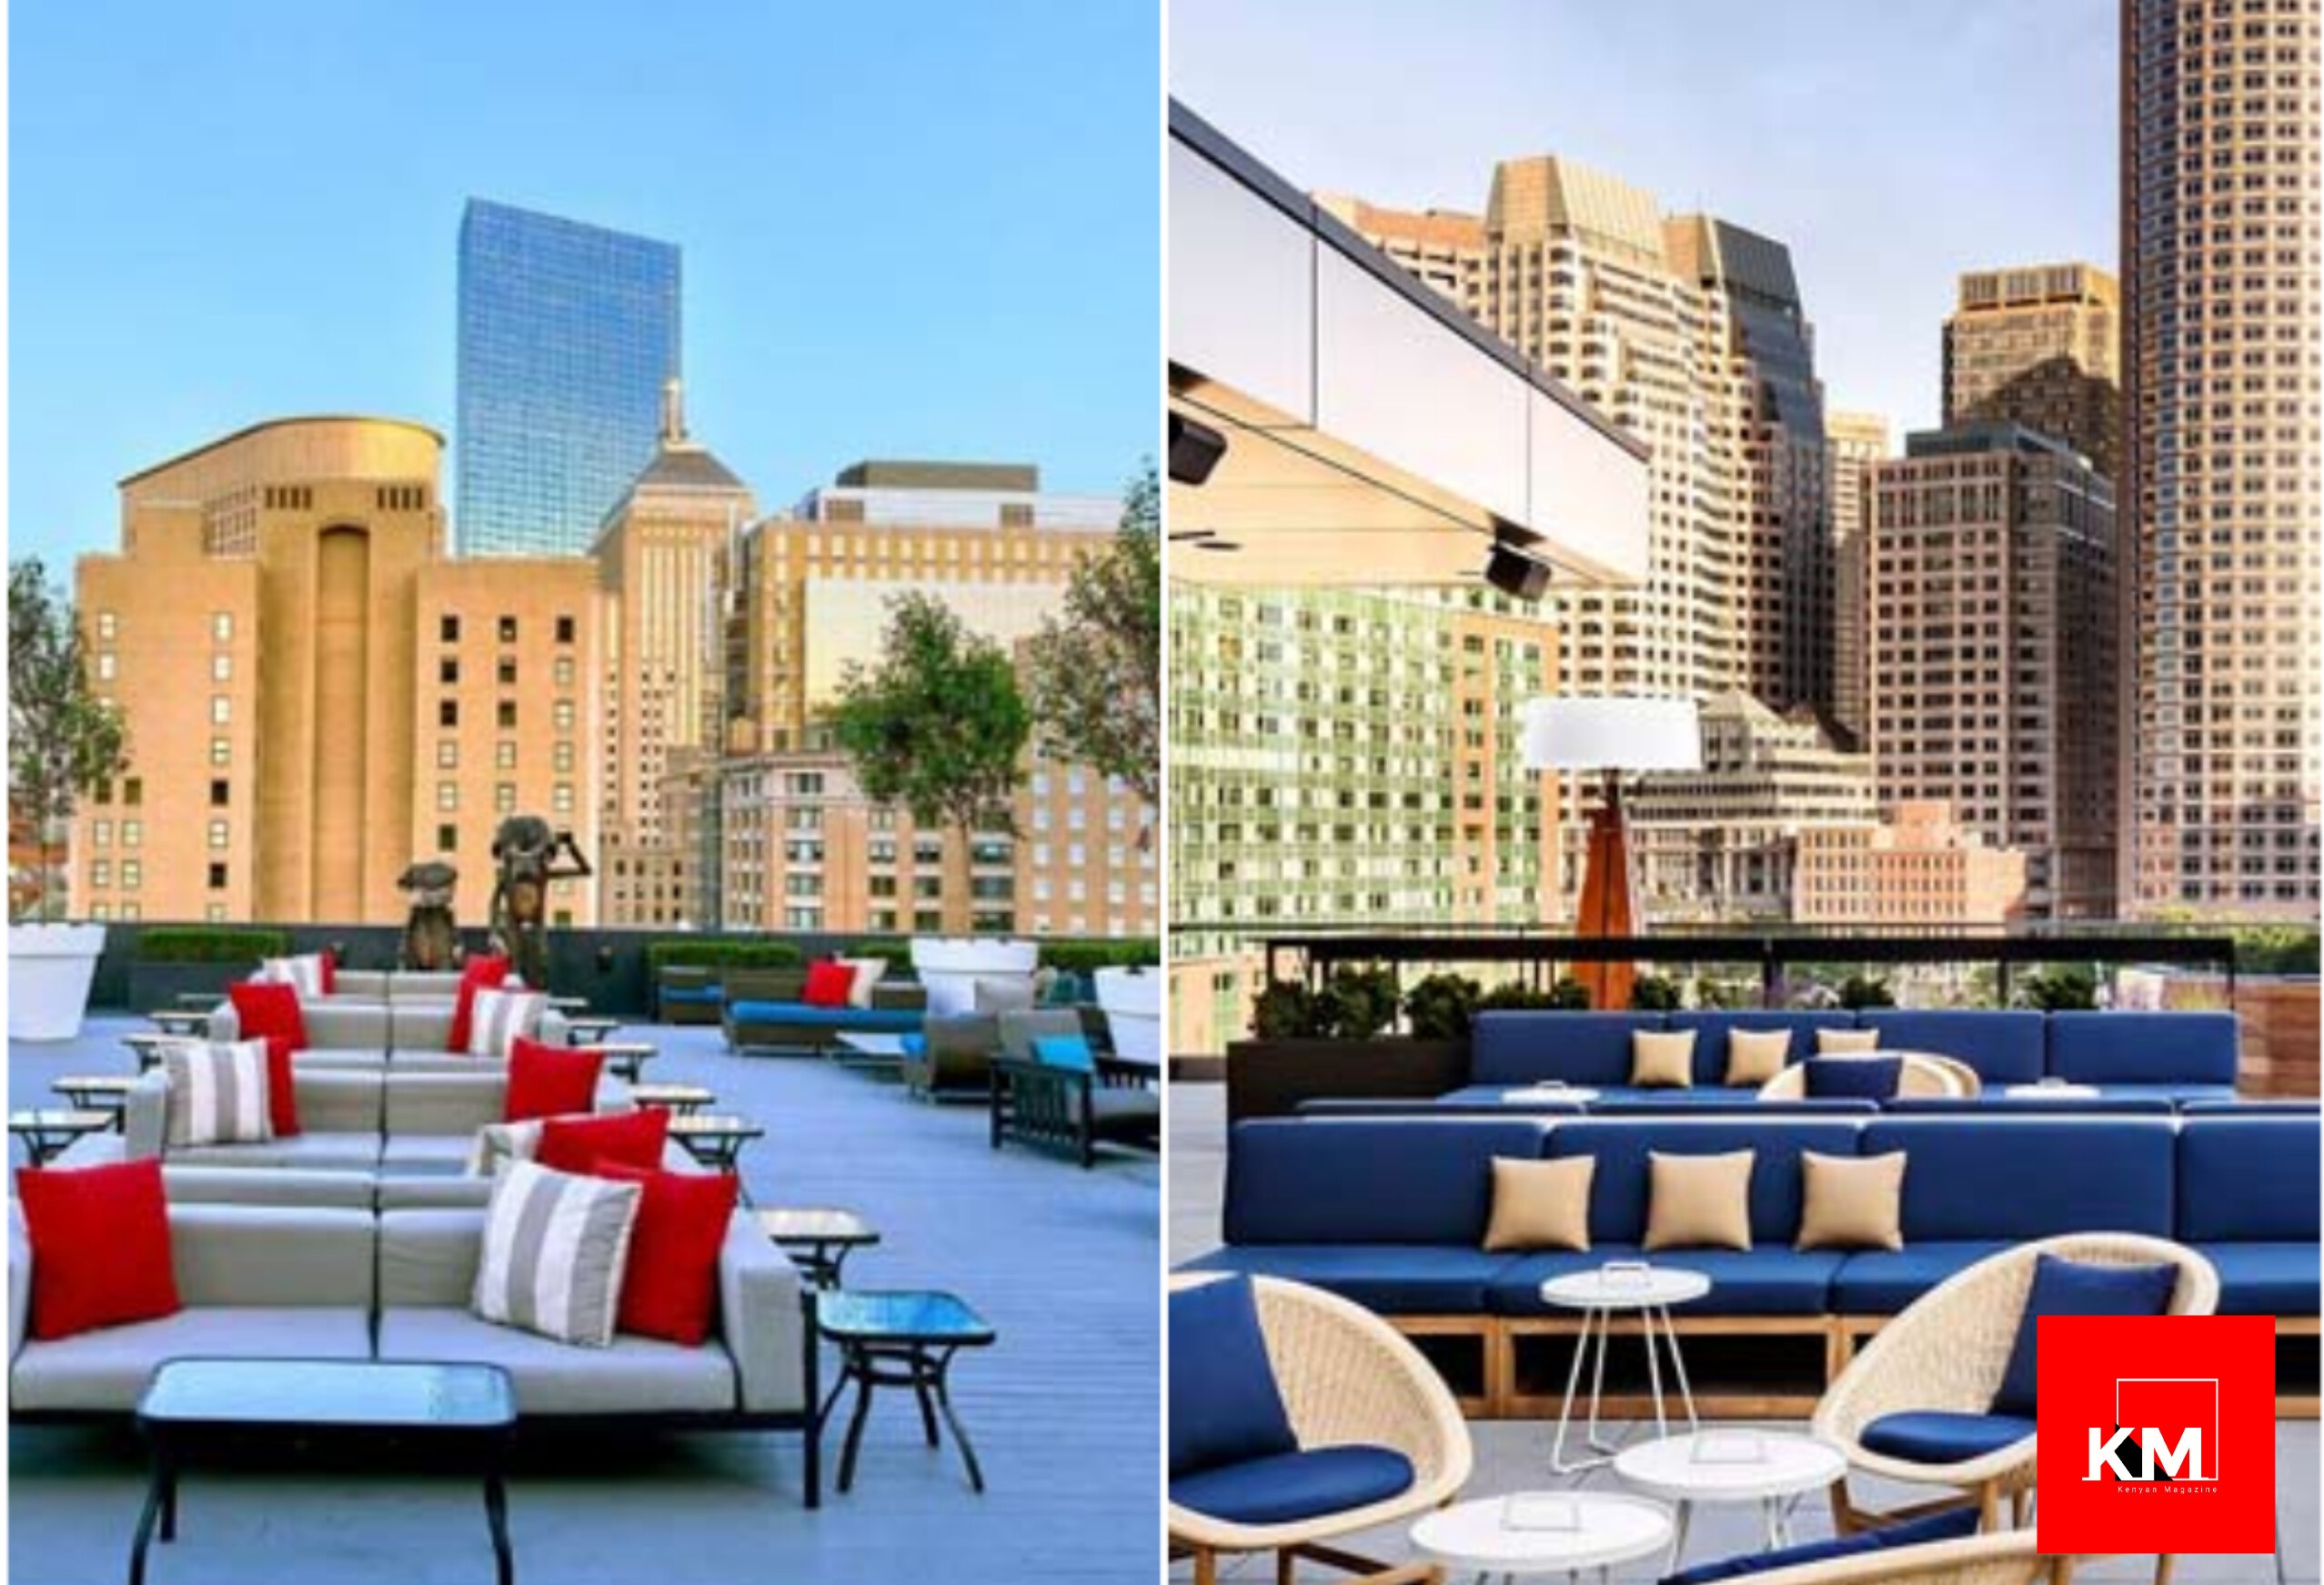 Best Rooftop Bars In Boston USA